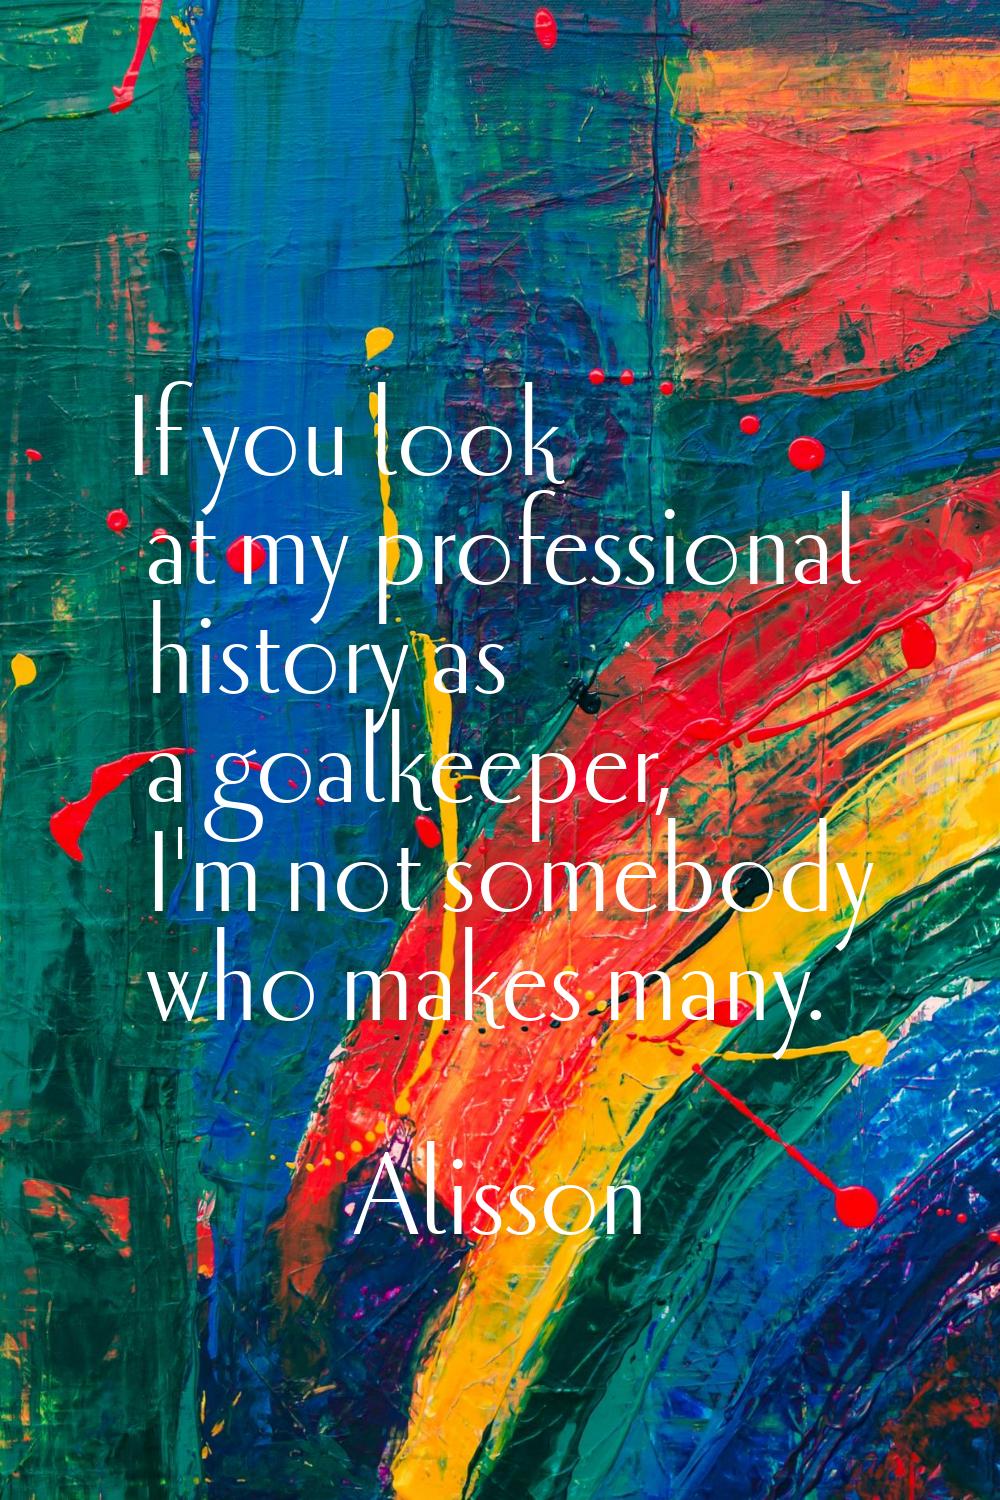 If you look at my professional history as a goalkeeper, I'm not somebody who makes many.